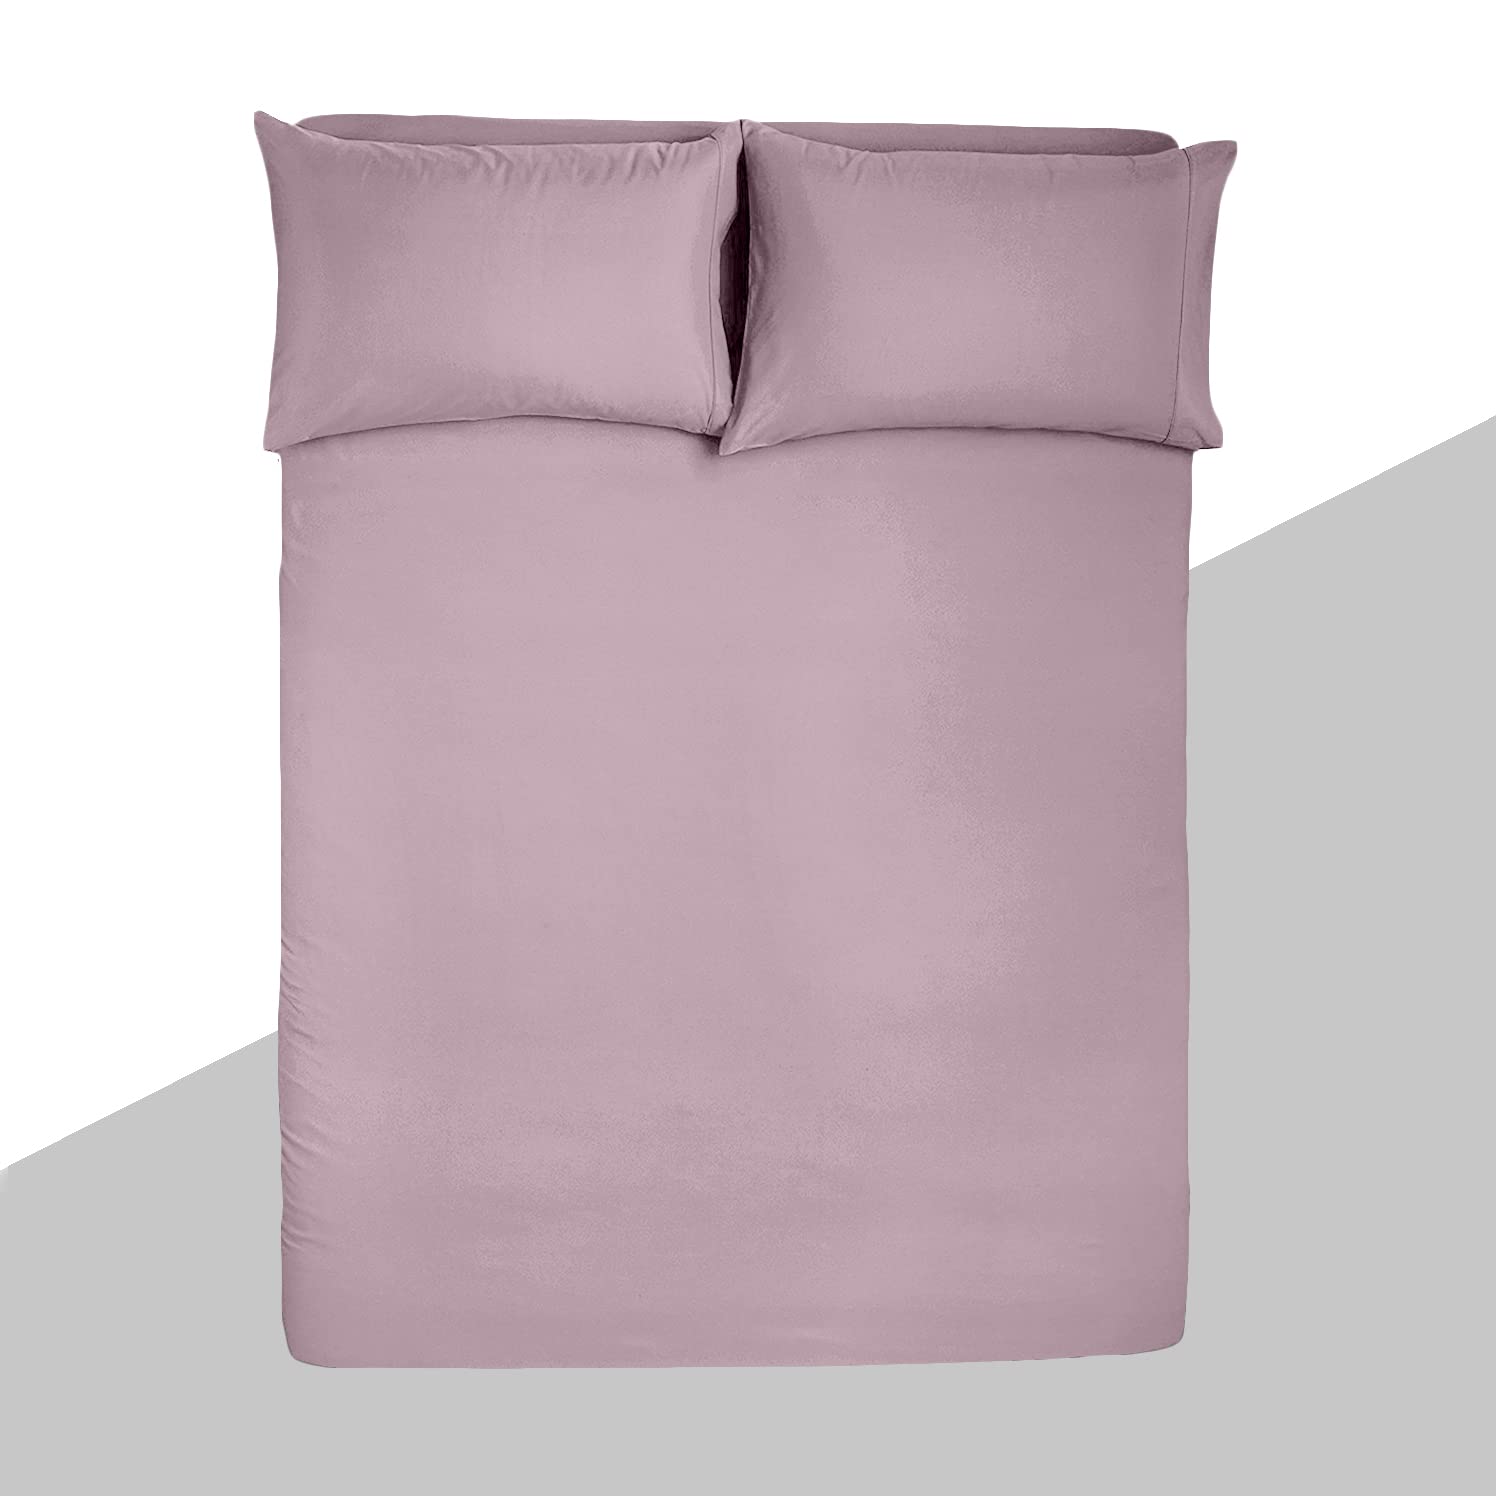 Bedsheet Single / Double Bed, Mid Lilac